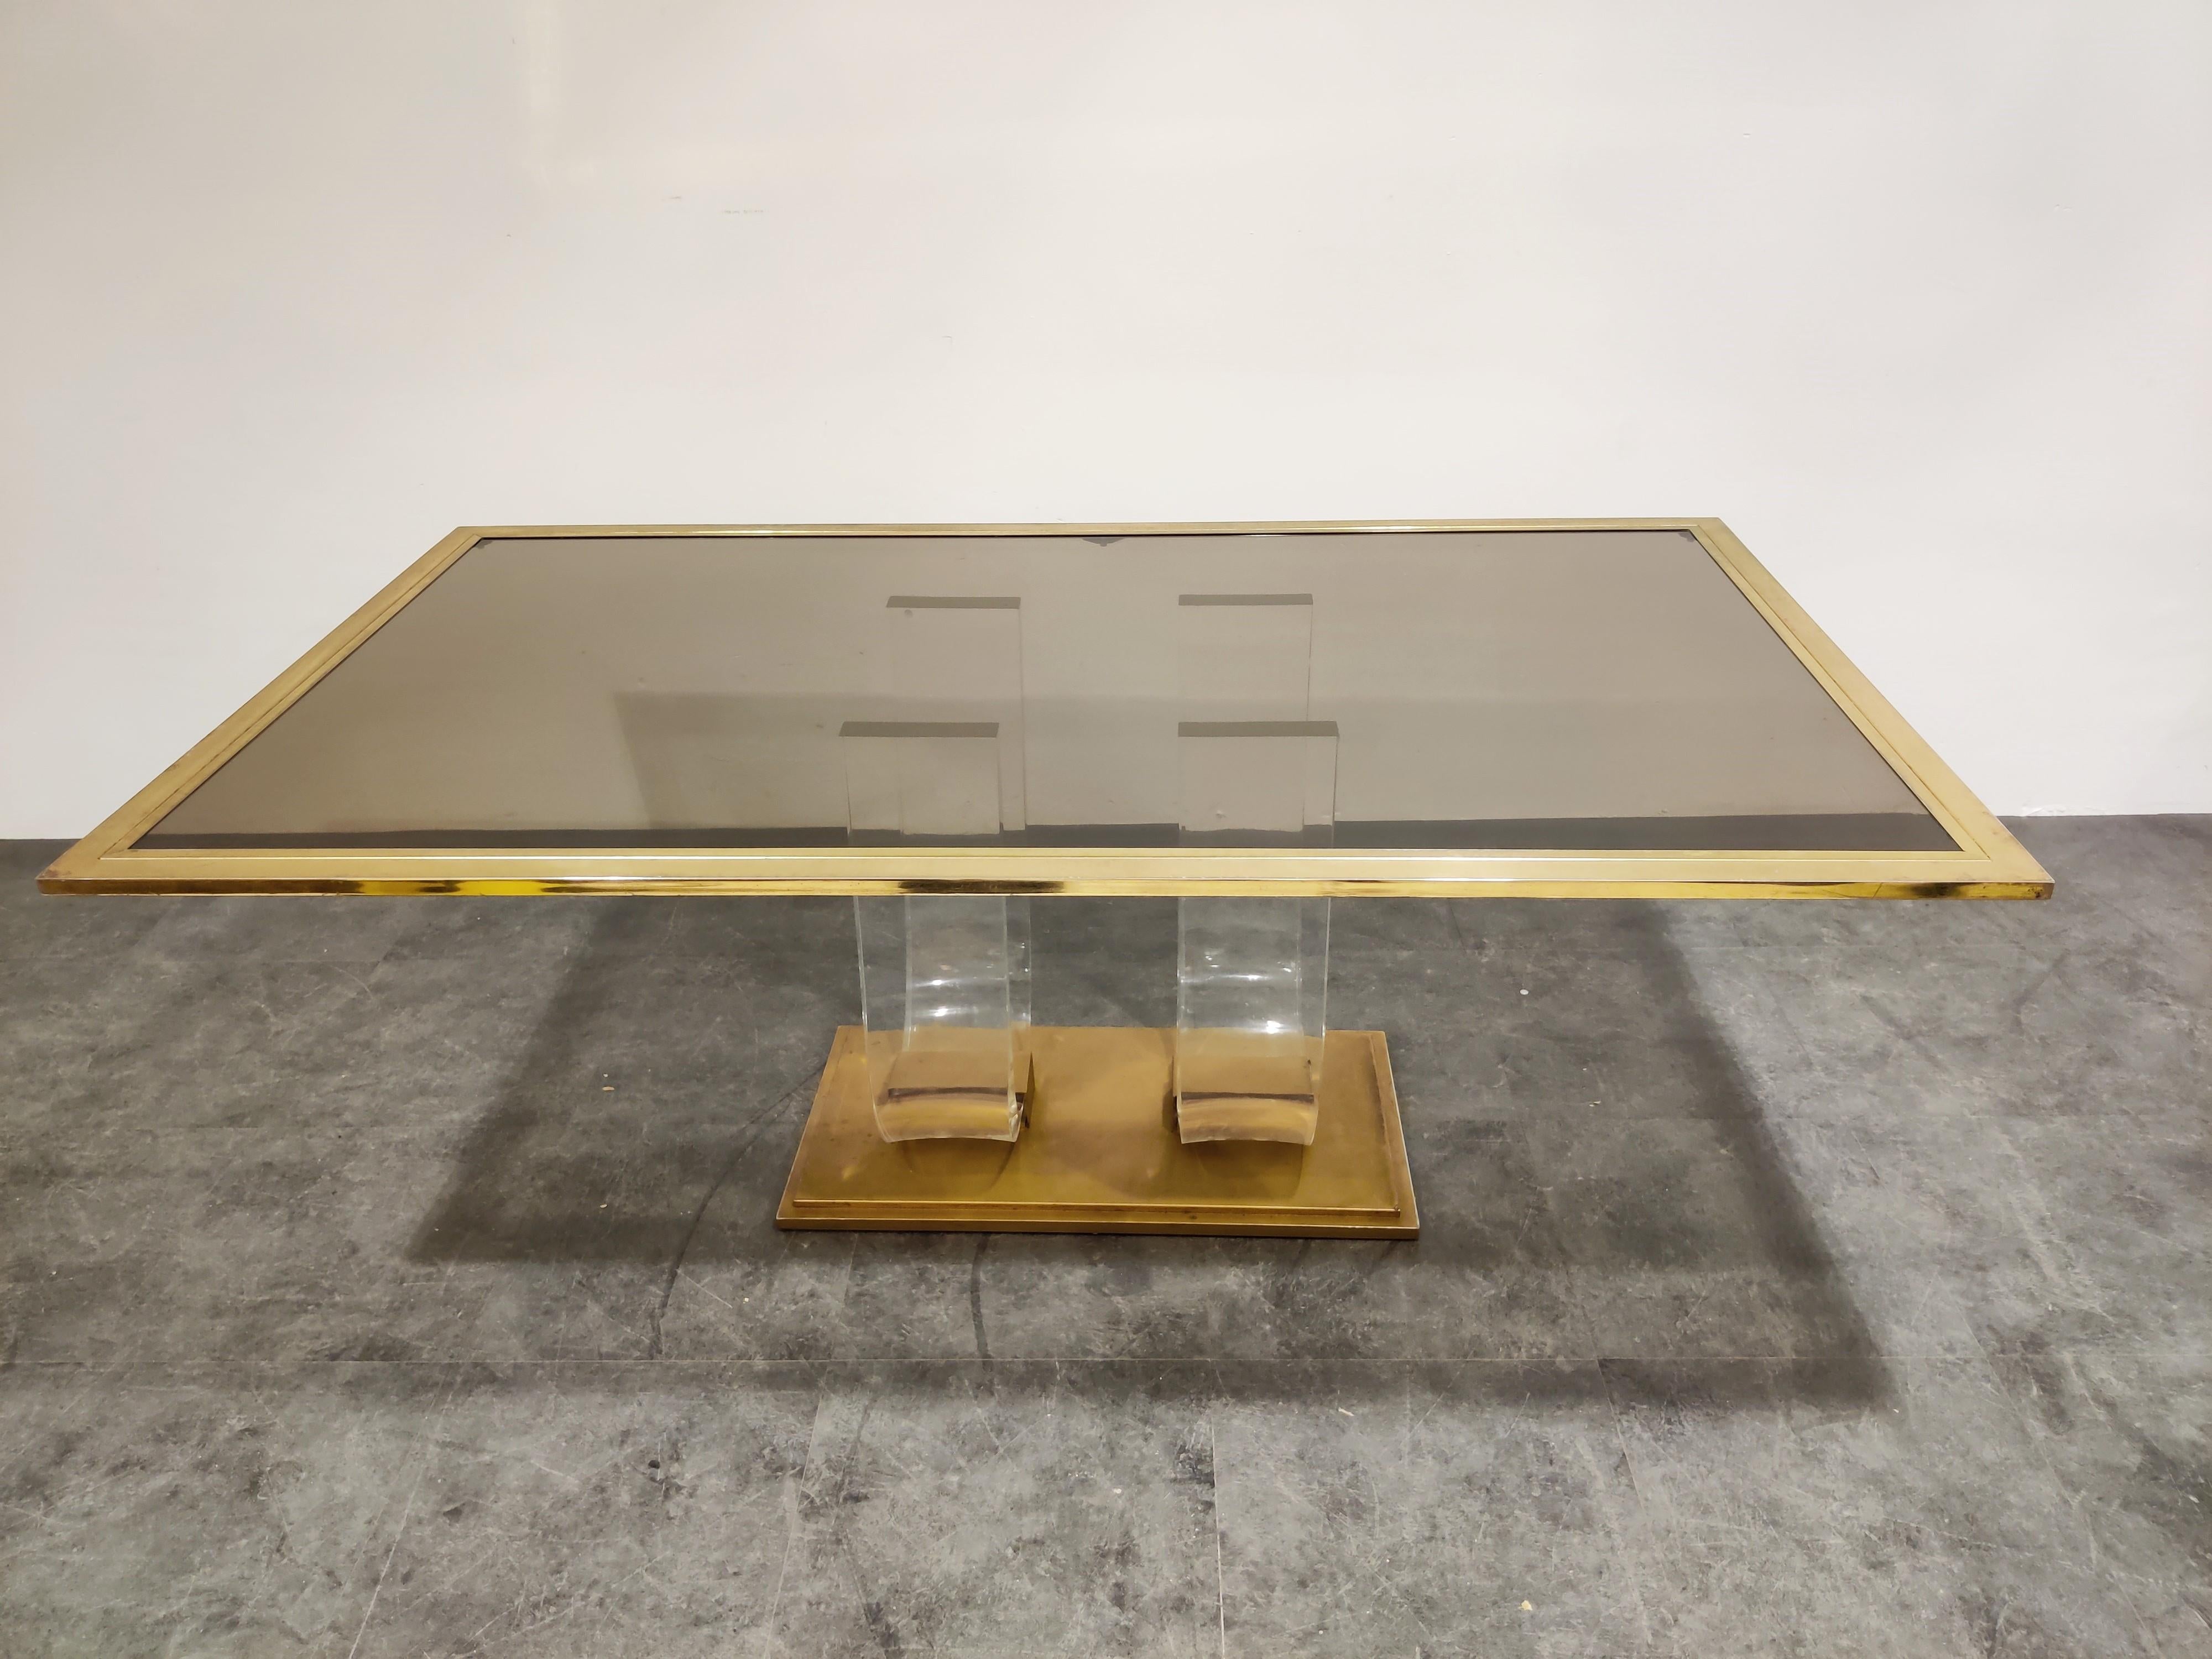 Beautiful Hollywood Regency dining table.

Rectangular brass frame and smoked glass top mounted on a double arched Lucite base with a solid brass foot.

Spectacular design which will be a real eye catcher for the dining room.

Timeless